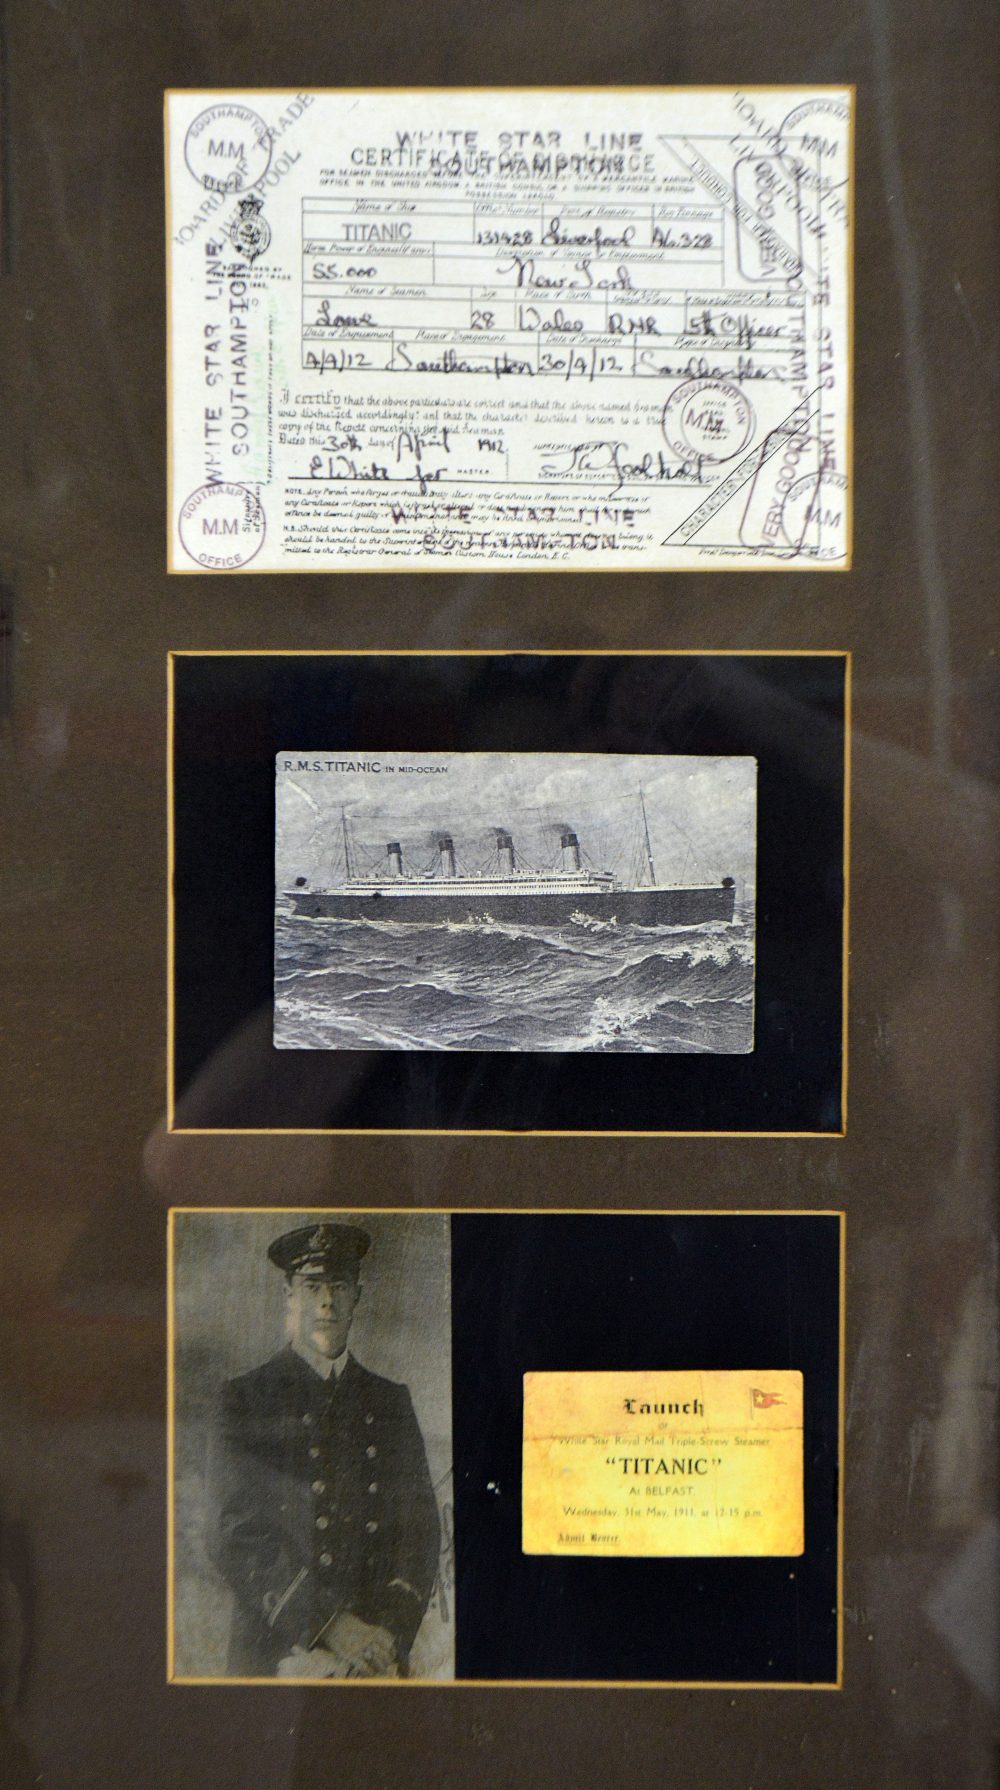 A decorative Titanic montage framed in three sections and glazed.